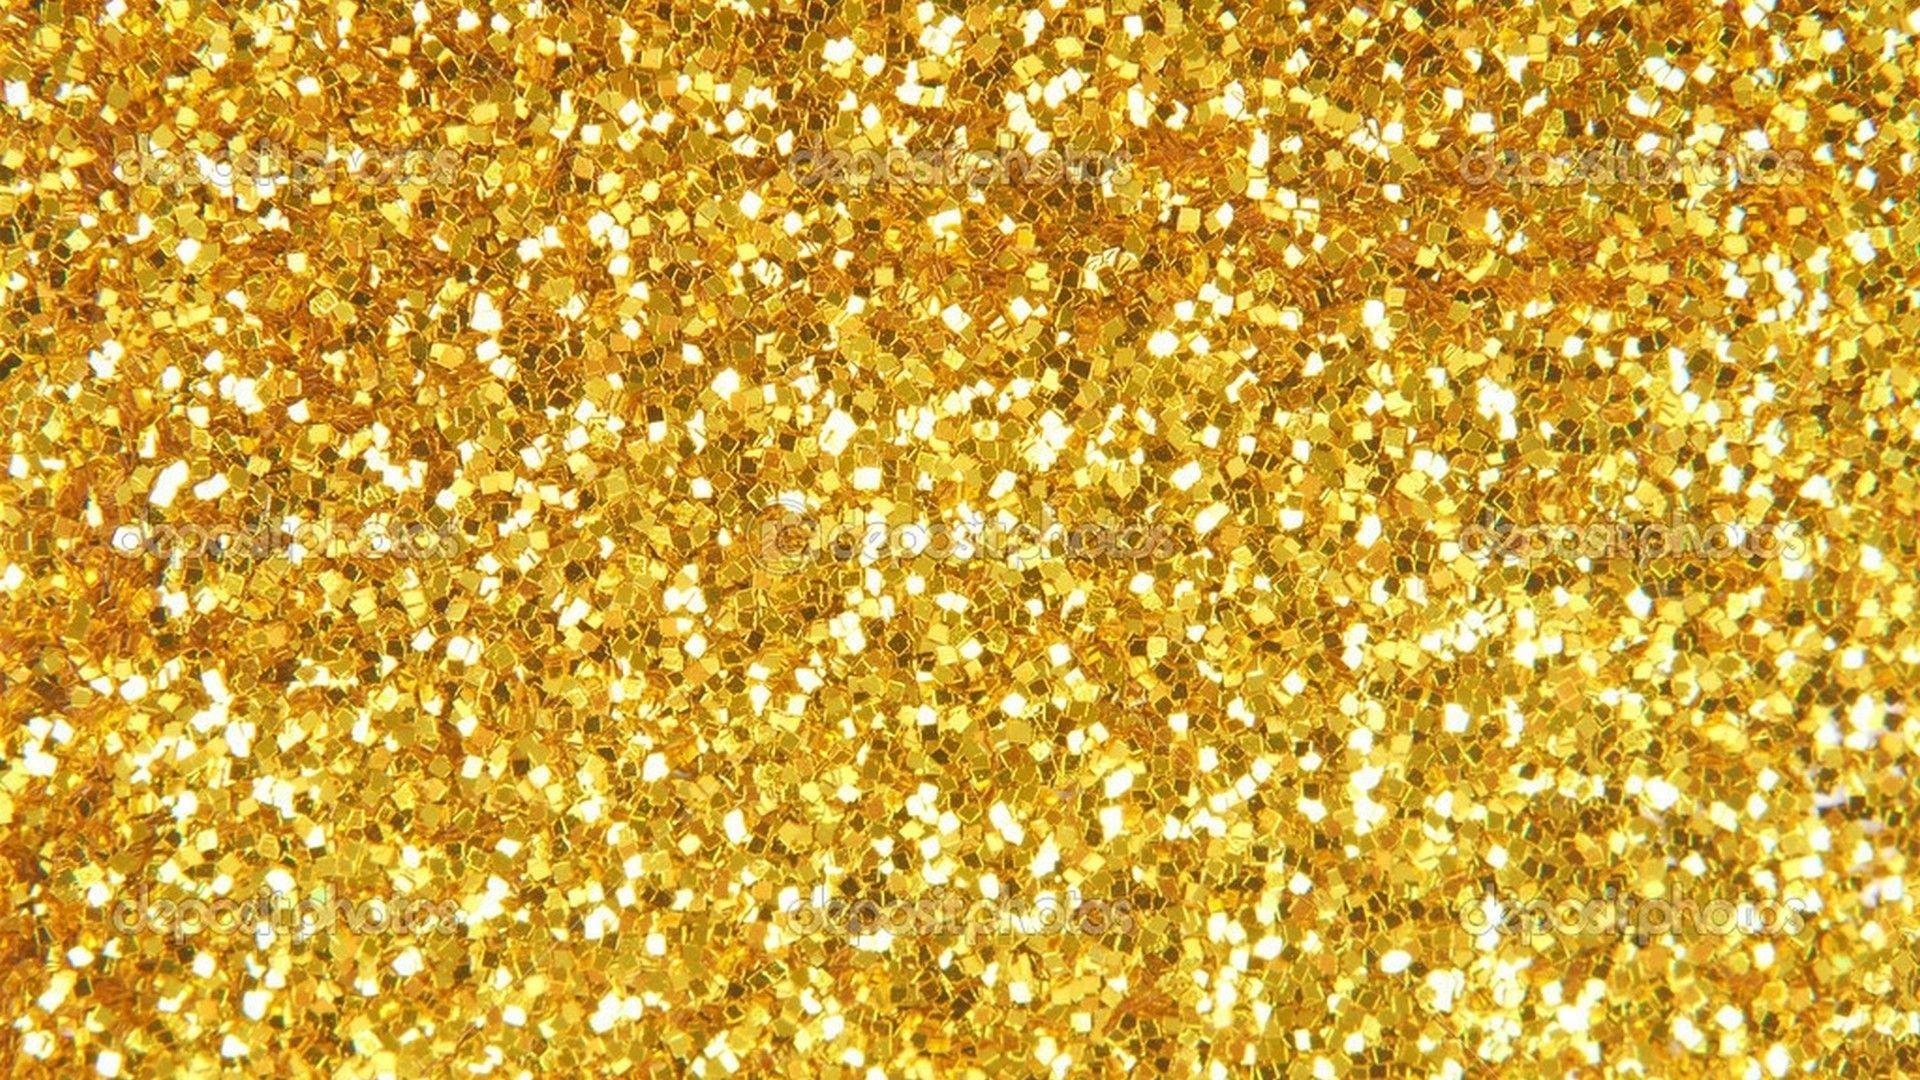 Gold Glitter Background Images HD Pictures and Wallpaper For Free Download   Pngtree